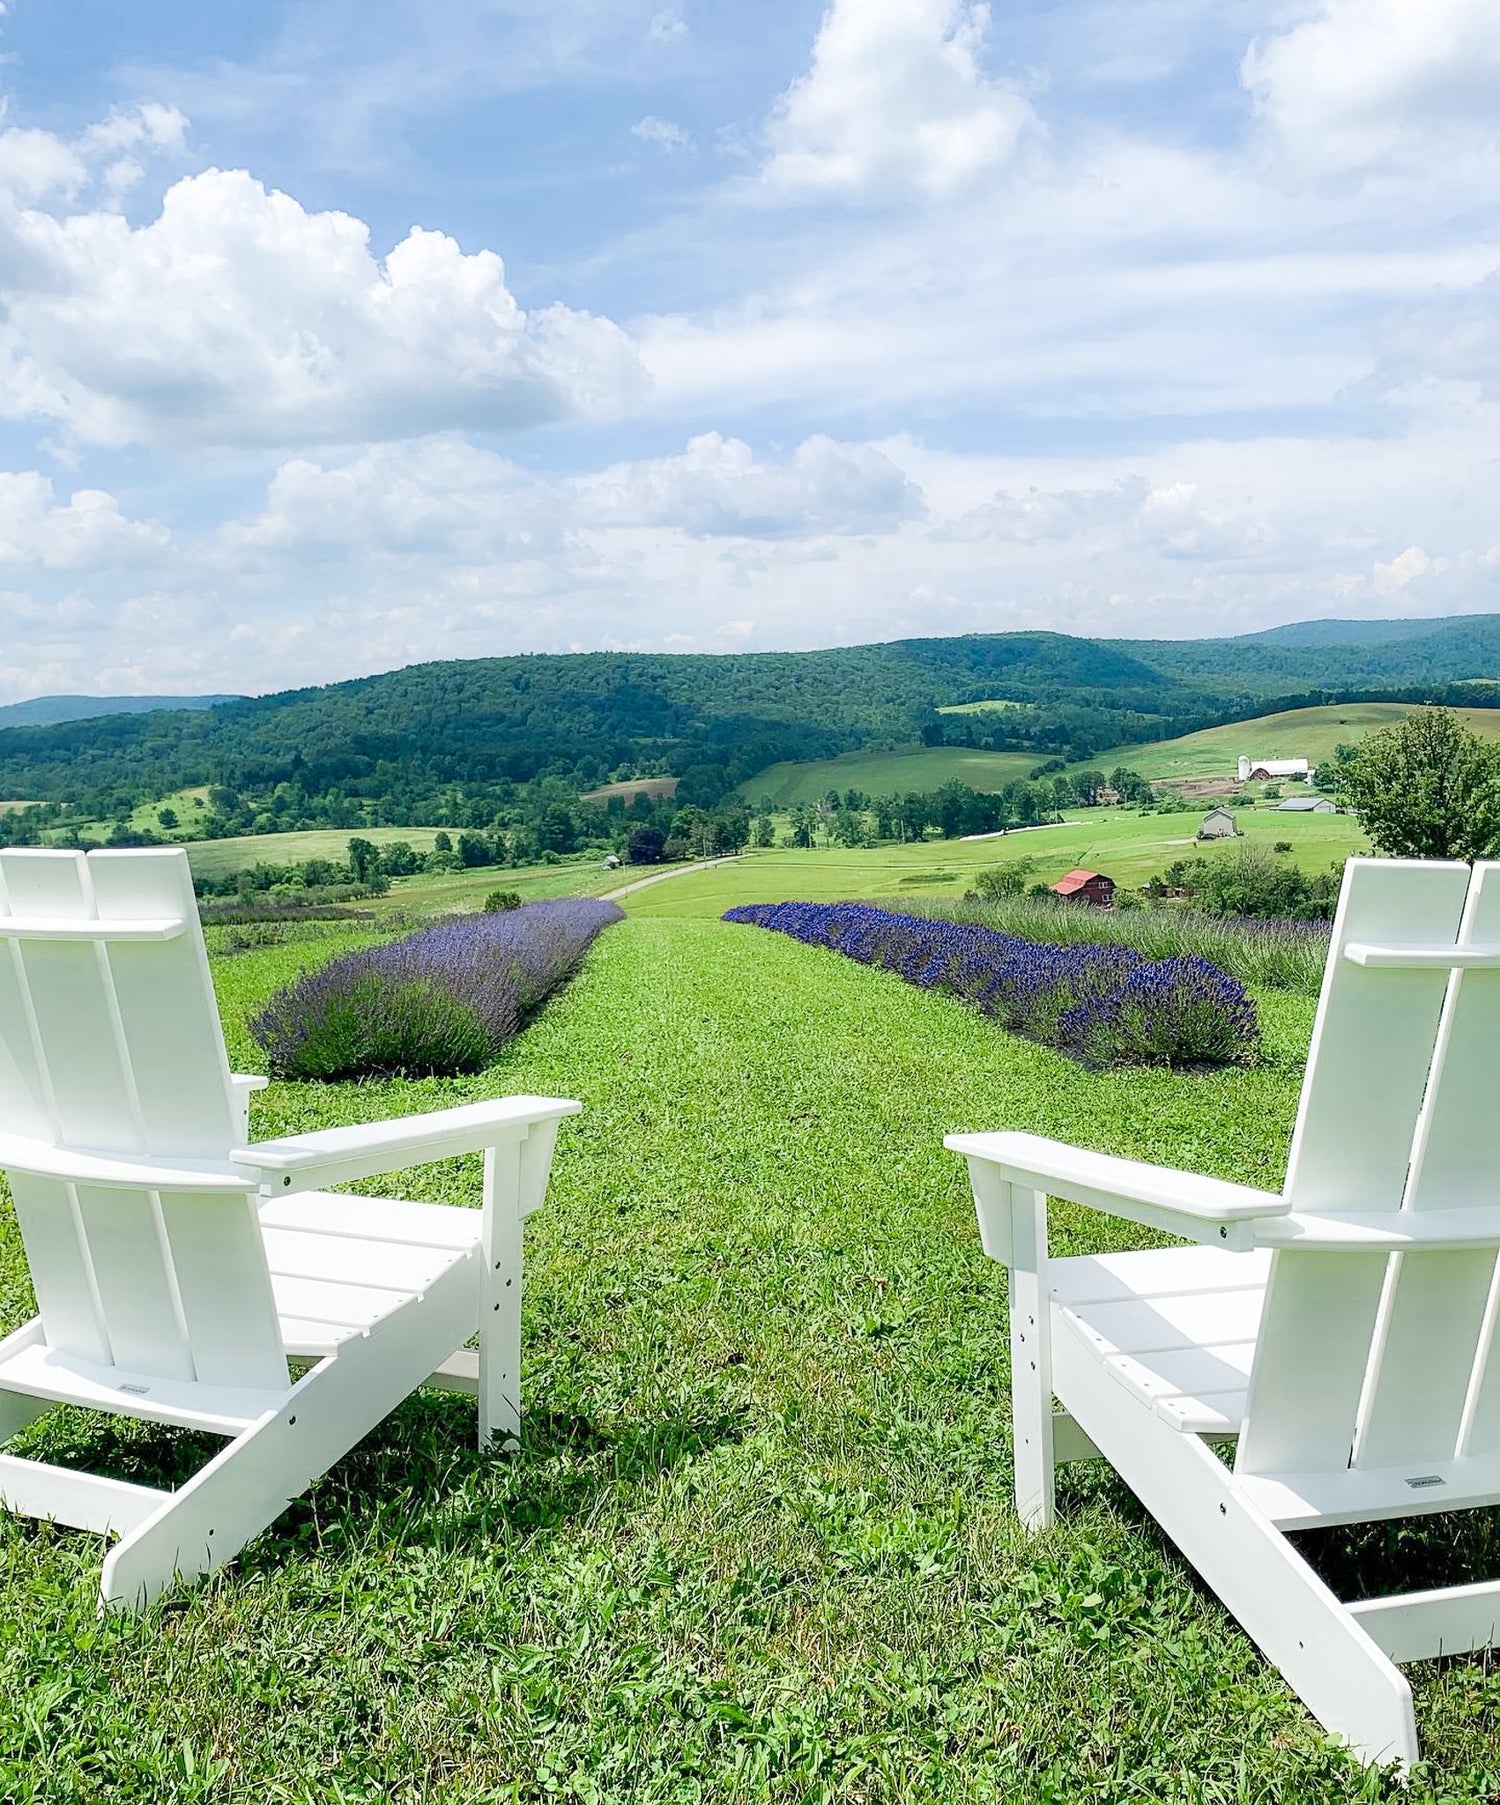 Two white Adirondack chairs facing towards a field of lavender at the Slate Hill Flower Farm. The sky is bright blue and sunny and the view is of the Mohawk Valley.